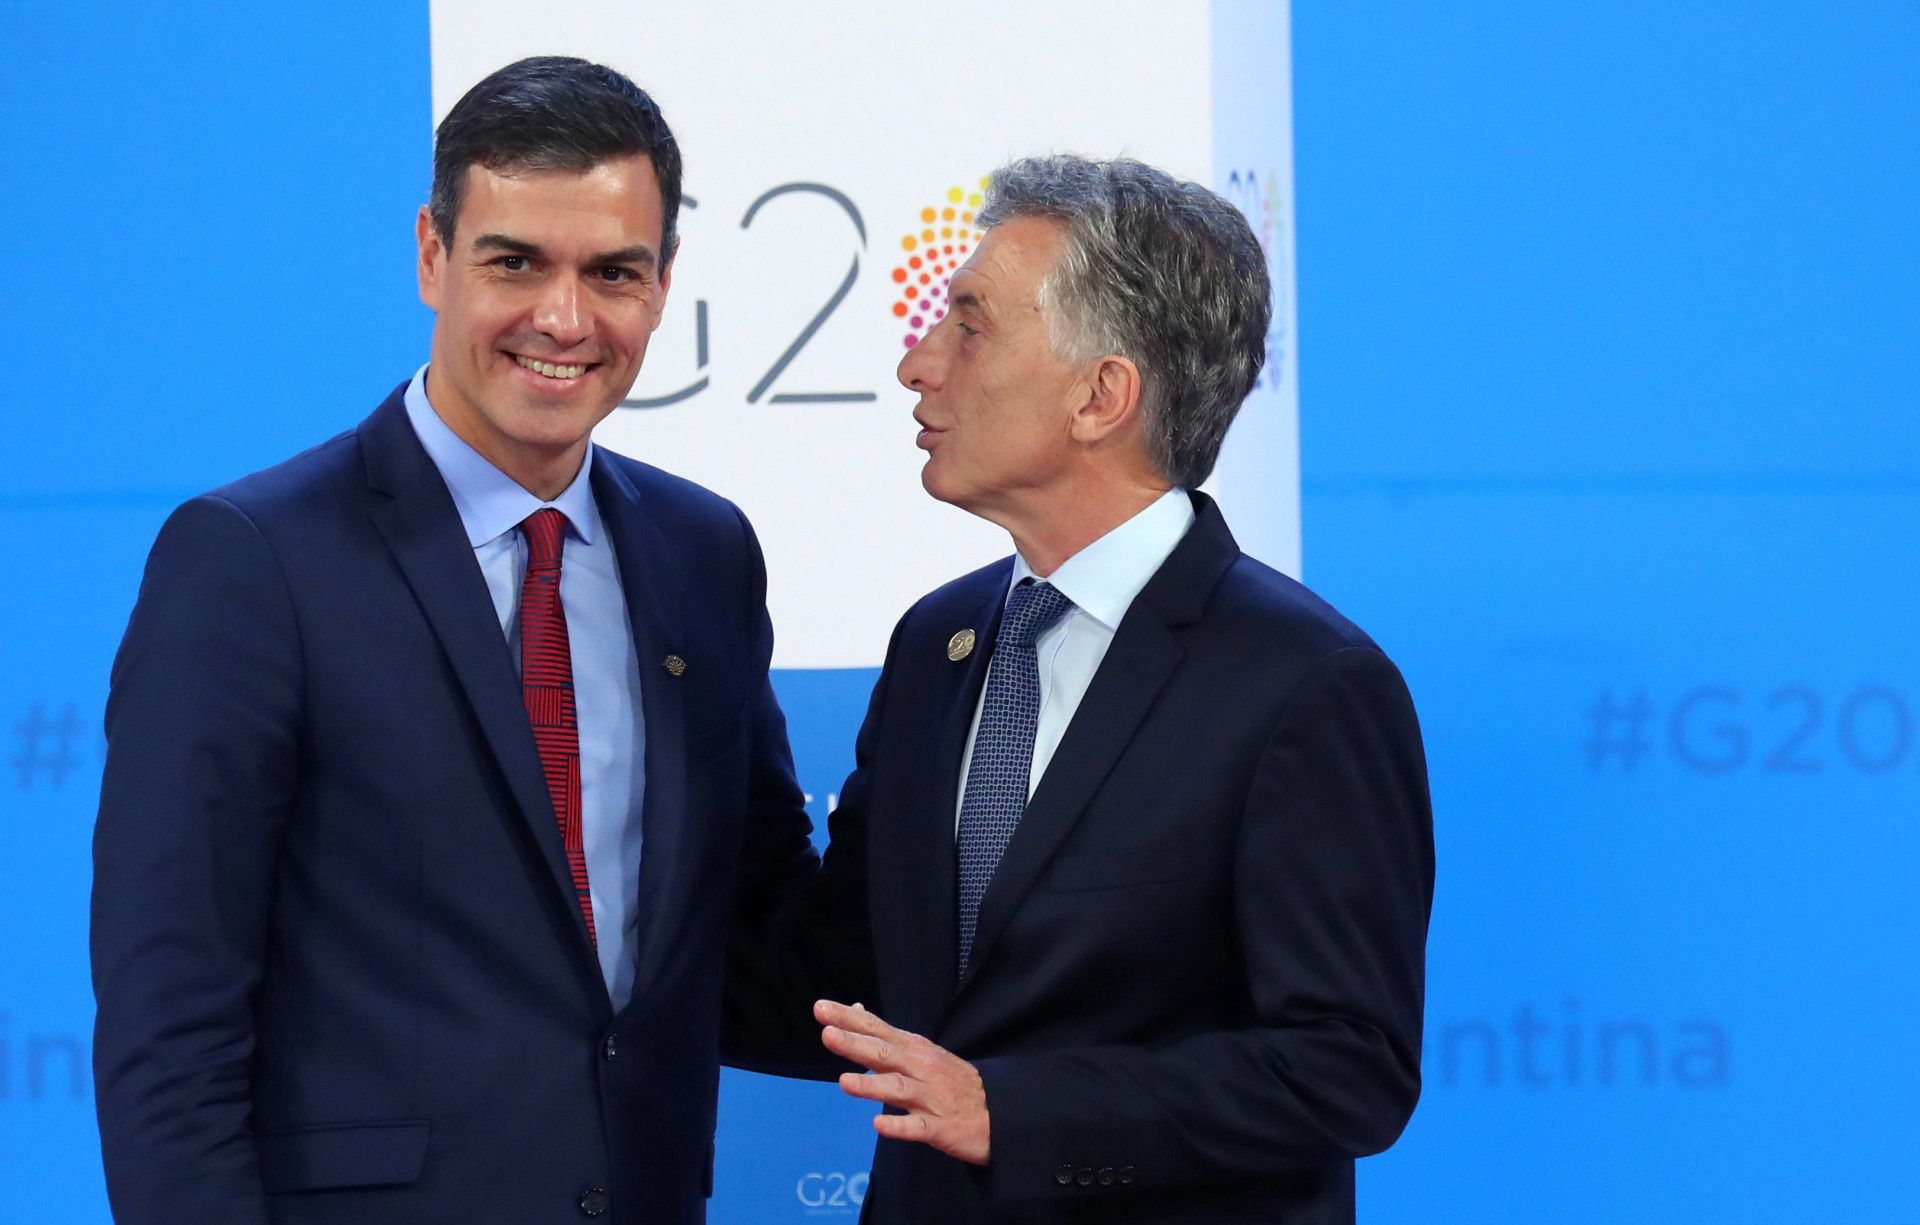 Spain's Prime Minister Pedro Sanchez is welcomed by Argentina's President Mauricio Macri as he arrives for the G20 leaders summit in Buenos Aires, Argentina November 30, 2018. REUTERS/Marcos Brindicci